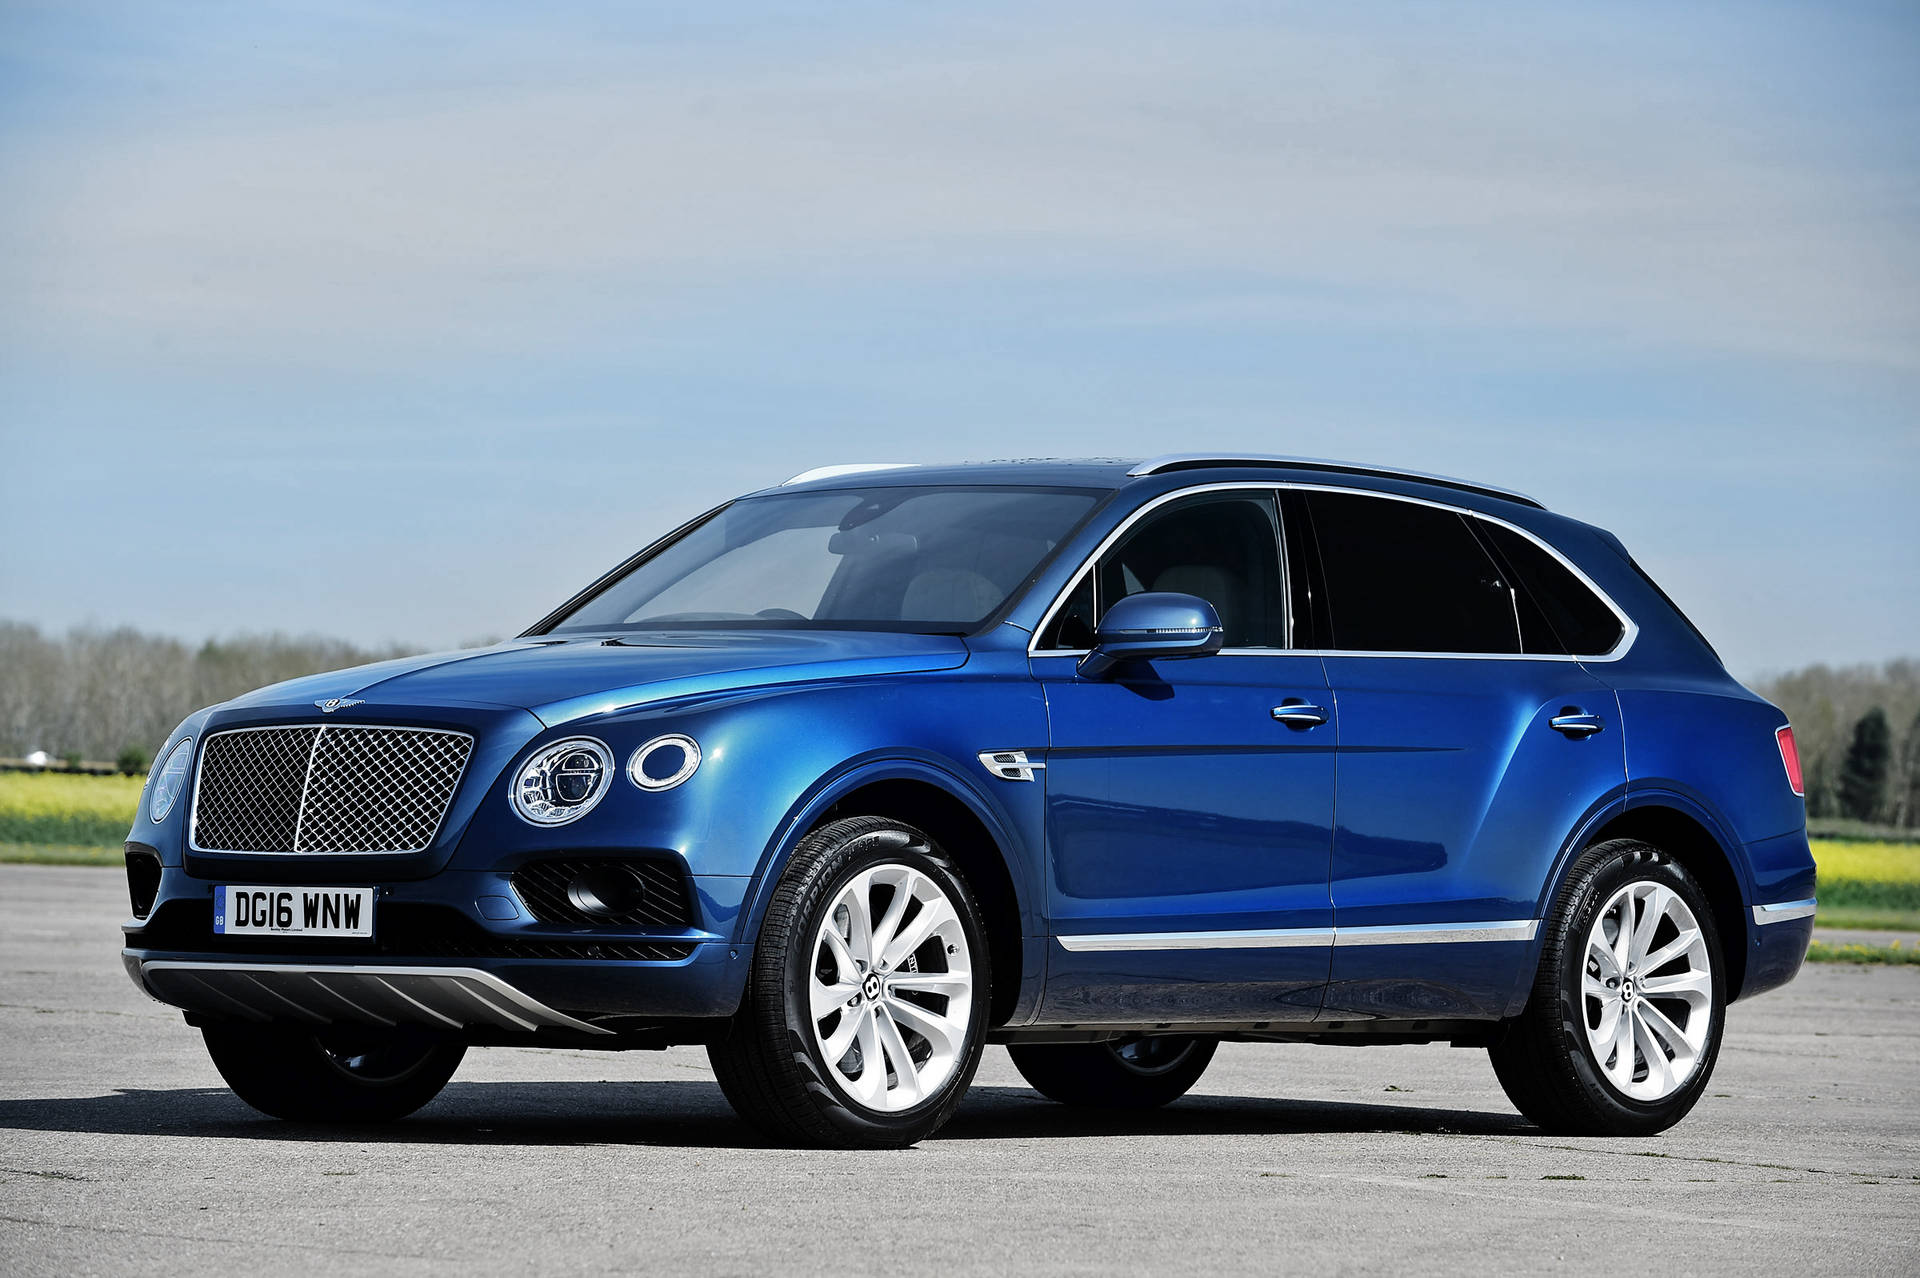 Discover the power of luxury with the new Bentley Bentayga. Wallpaper